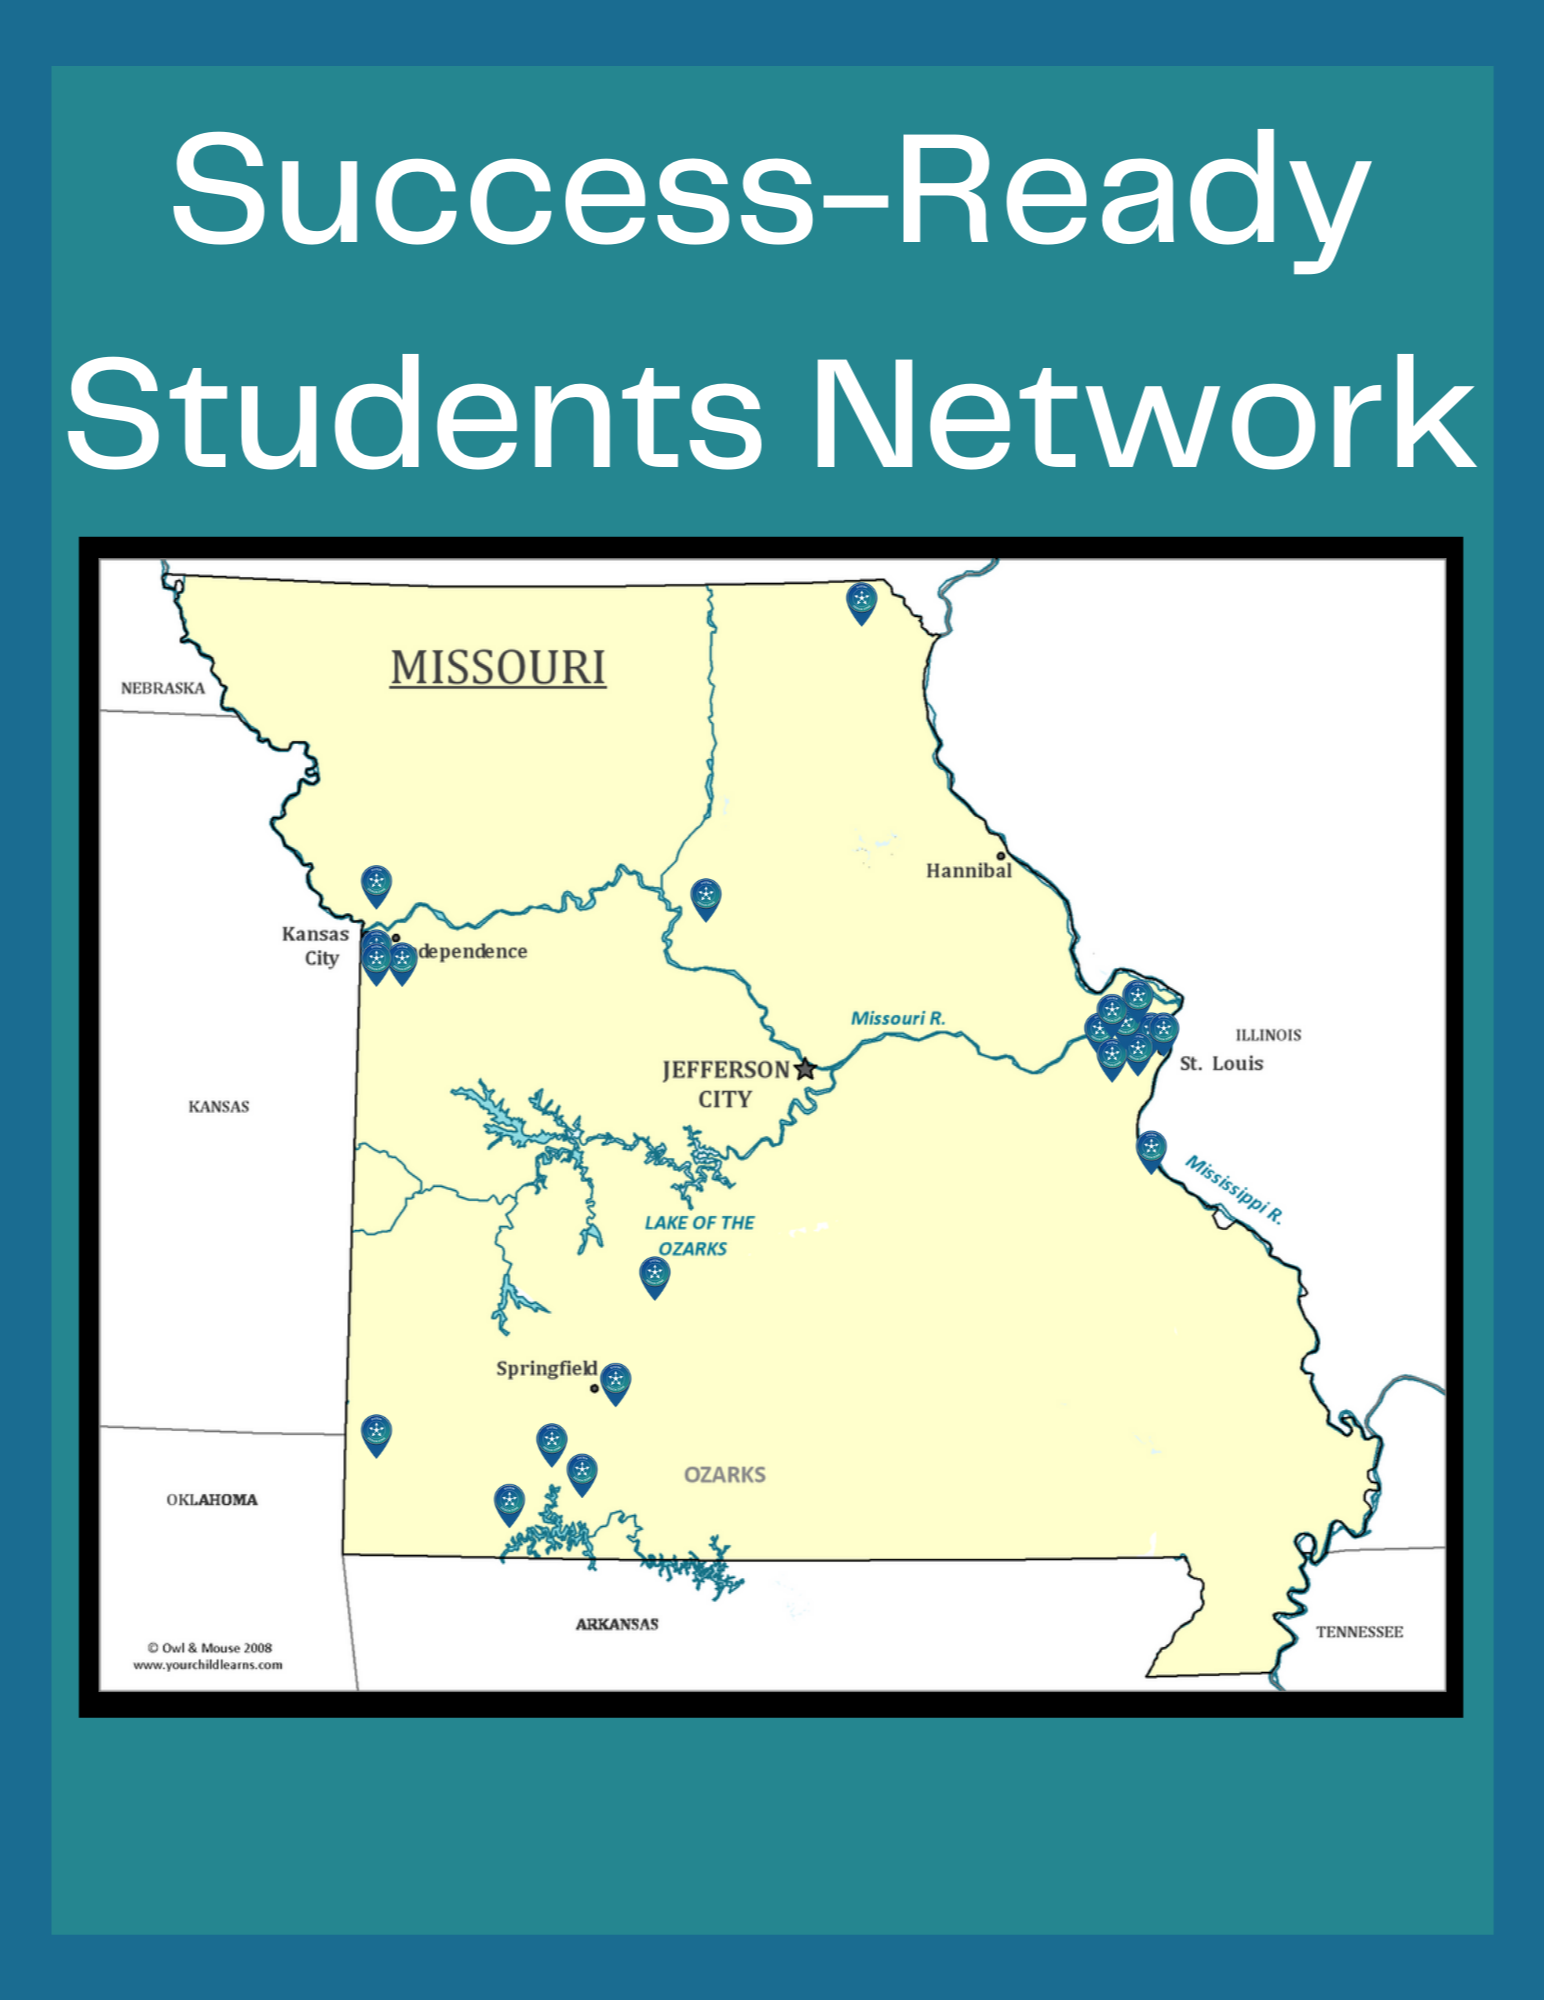 Map of Missouri with Success-Ready Students Network participant locations marked.